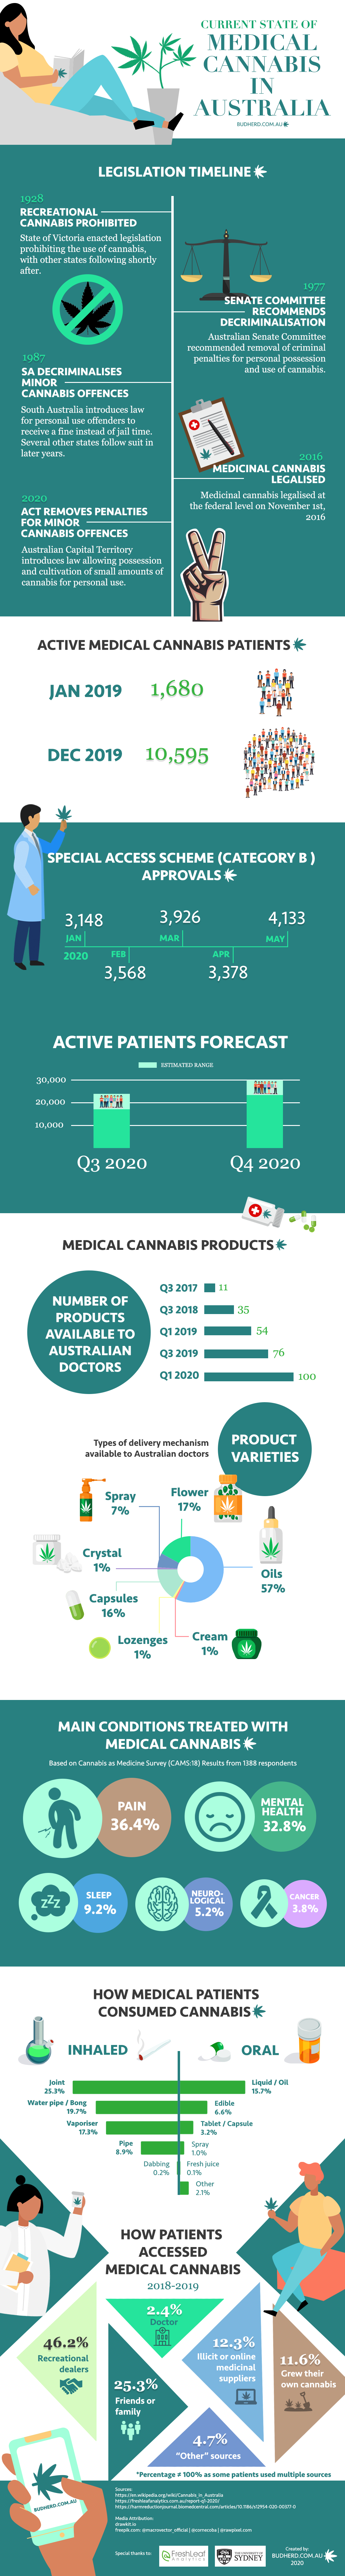 cover image for article Infographic: The current state of medicinal cannabis in Australia